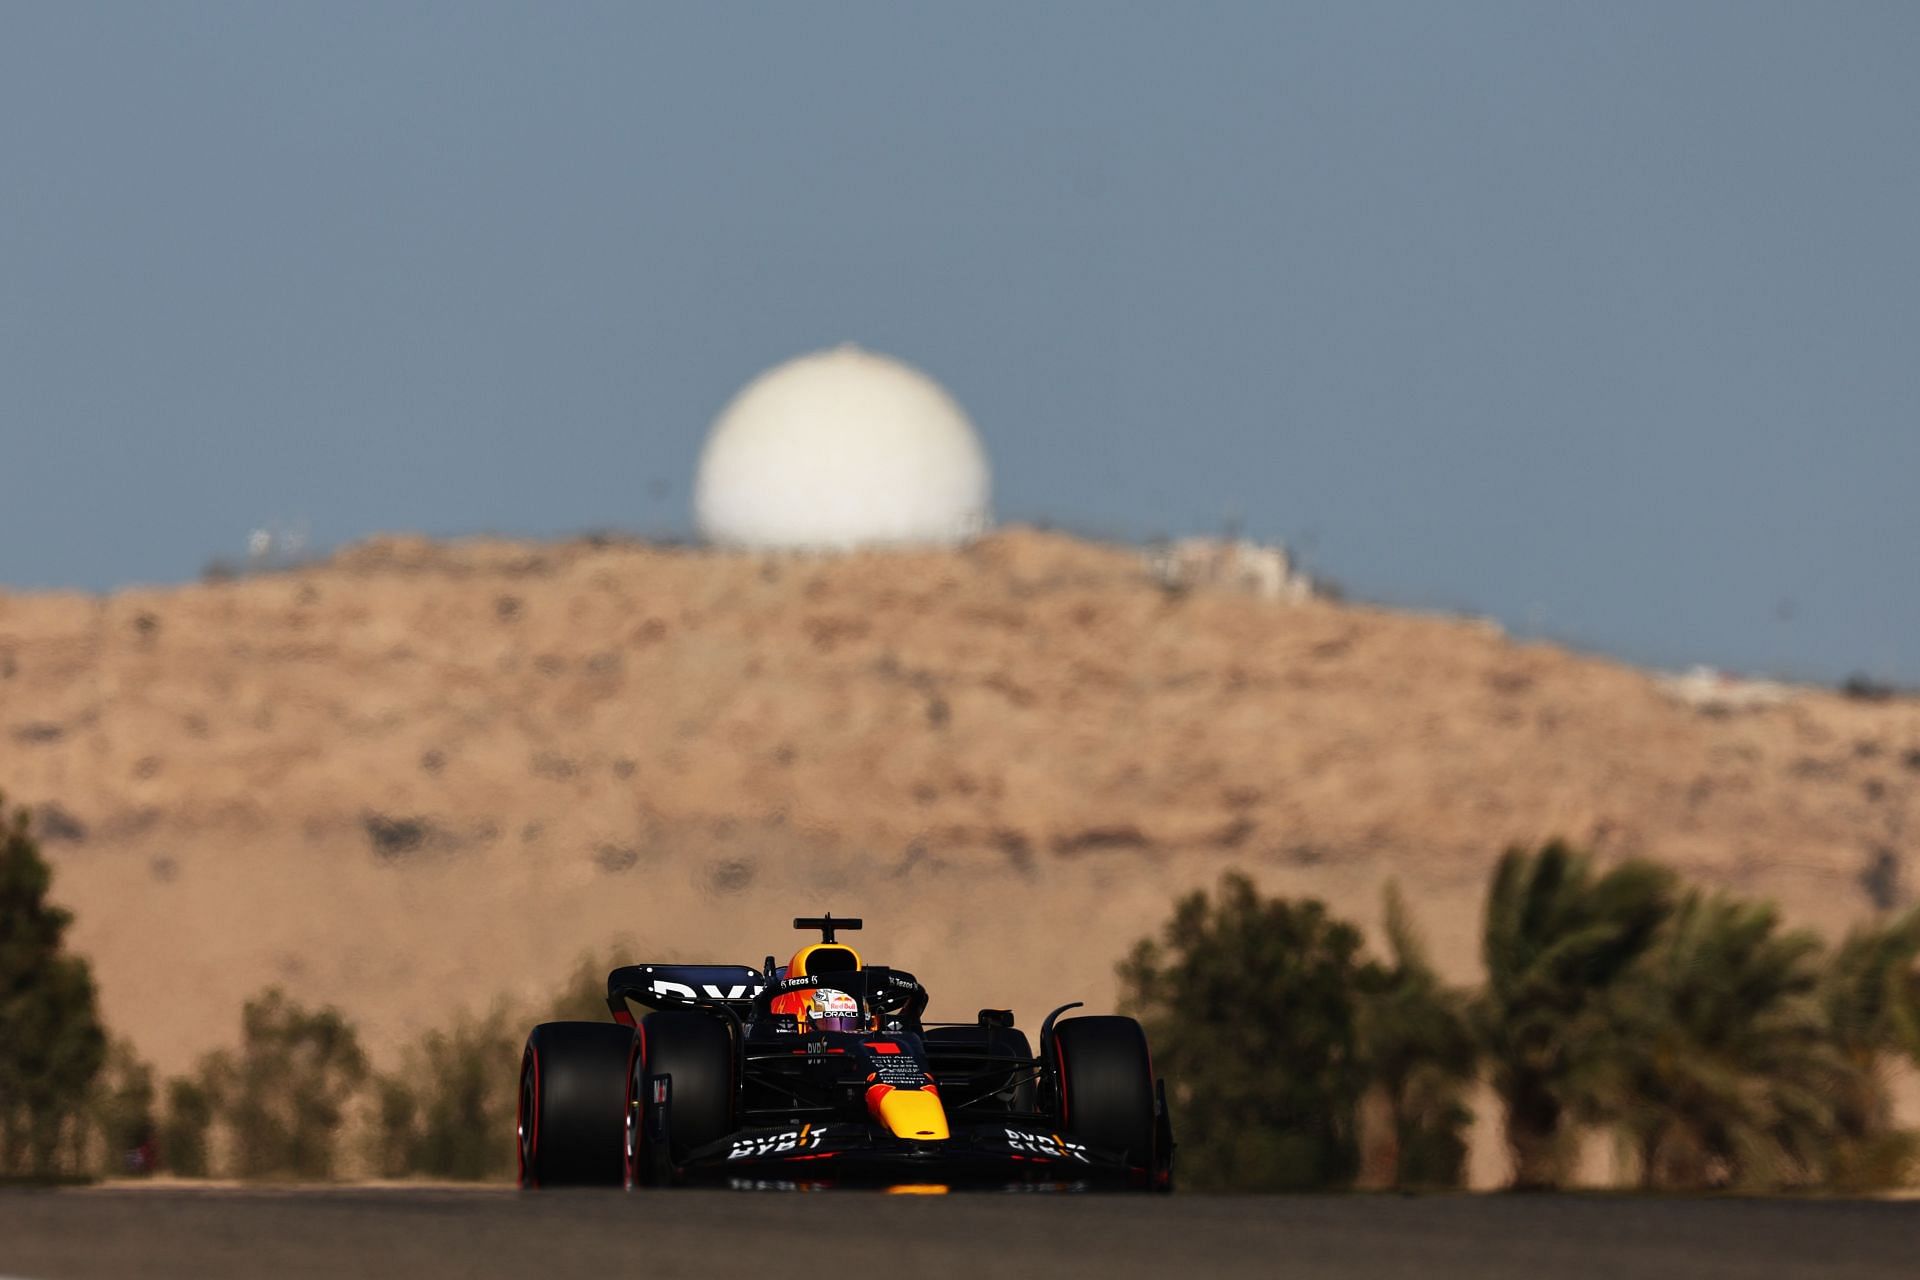 Max Verstappen once again led the charts in FP3 of the Bahrain GP